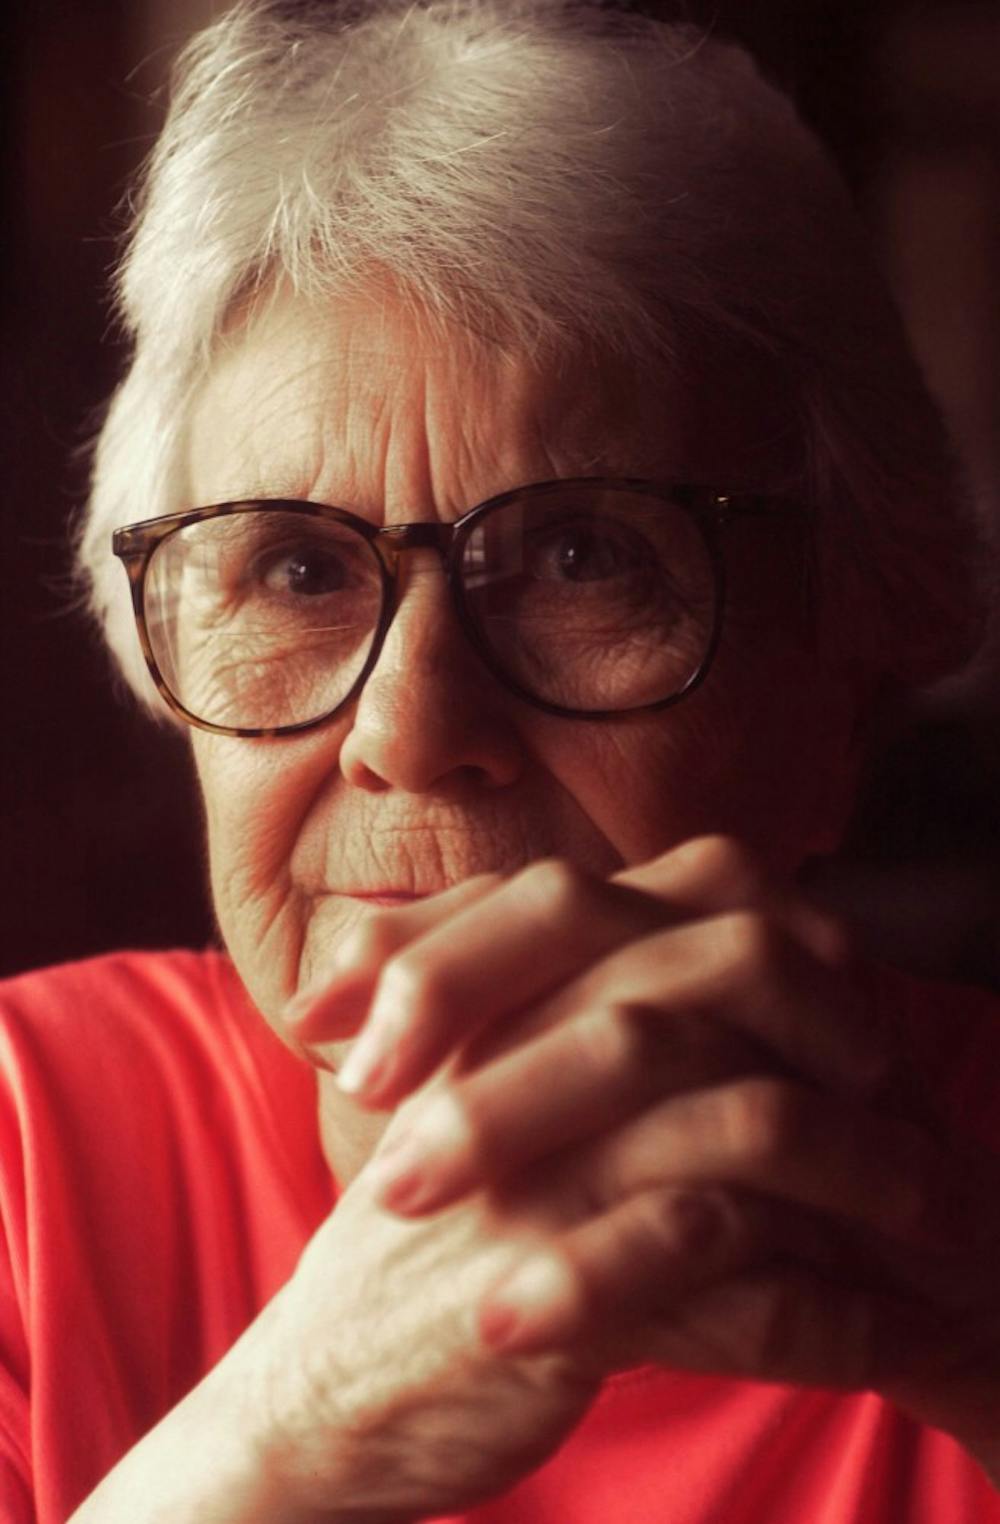 Author Harper Lee, who wrote "To Kill a Mockingbird," is pictured at the Stage Coach Cafe in Stockton, Ala., in August 2001. The surprise sequel, "Go Set a Watchman," will be published July 13. (Terrence Antonio James/Chicago Tribune/TNS)